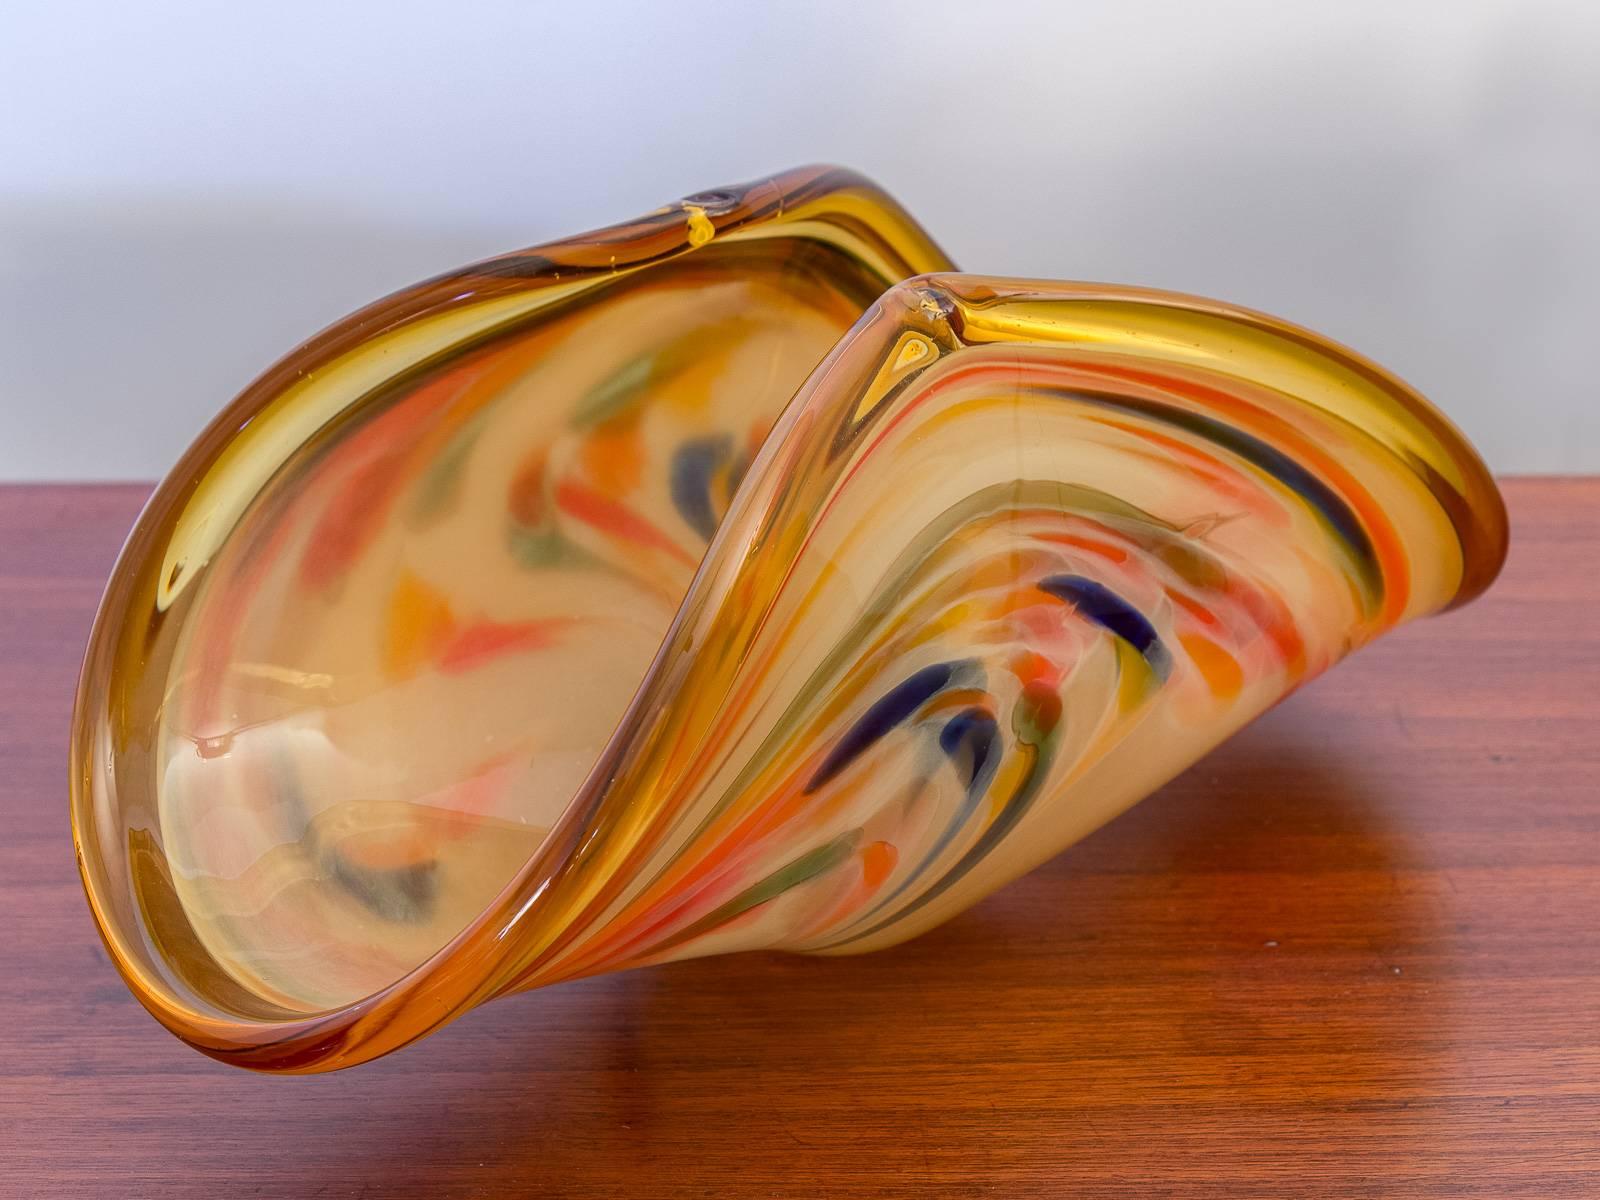 Fine, Italian Murano white crystal art glass. Warm orange and ultramarine meld into each other to form this fetching, abstract centerpiece. Murano label on the underside. Handblown in Italy.